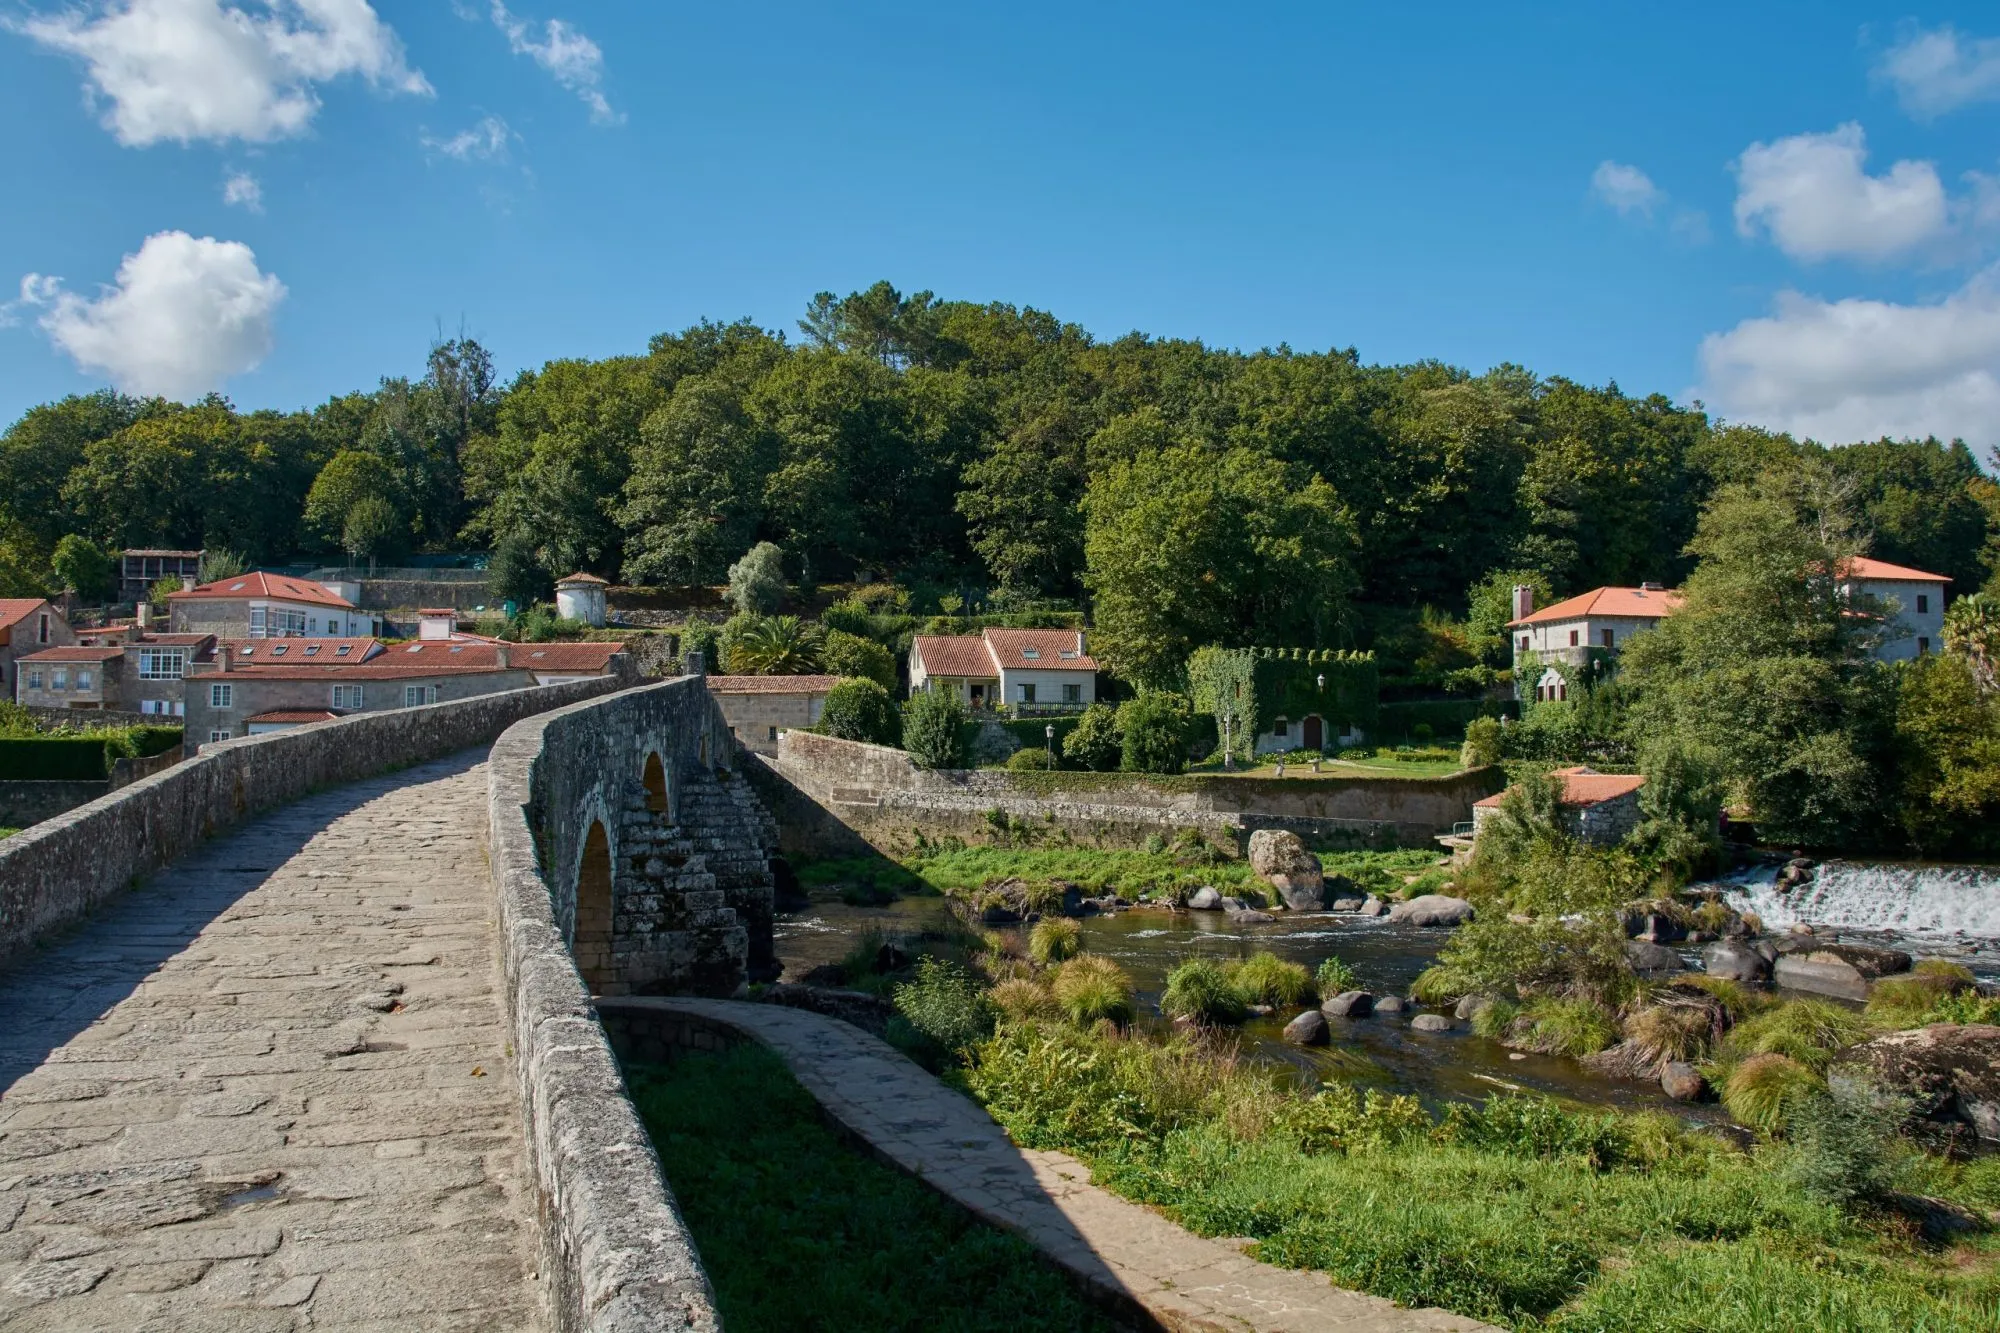 Ponte Maceira in the Way of St. James. This small village is in the the path from Santiago de Compostela to Finisterre and Muxia.